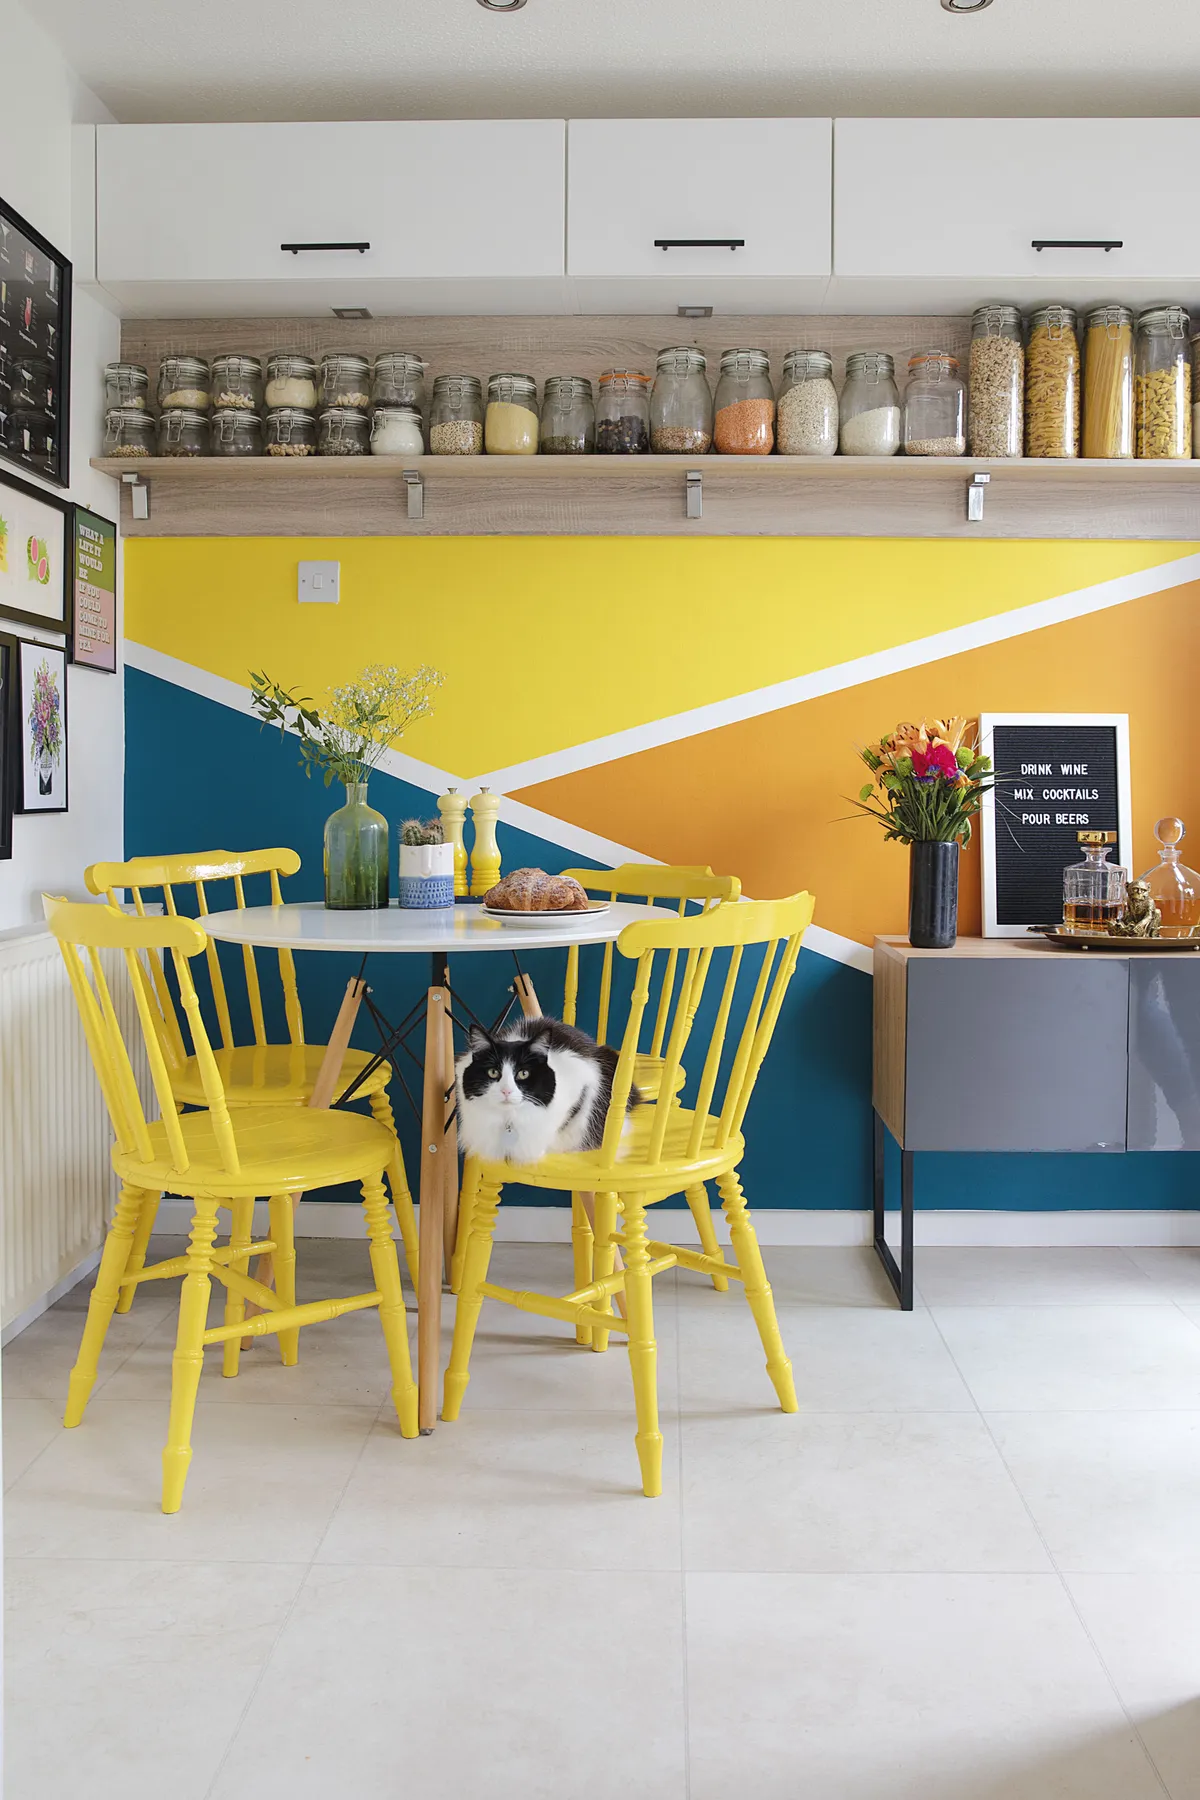 Home makeover: 'I've learnt so much from revamping my home'